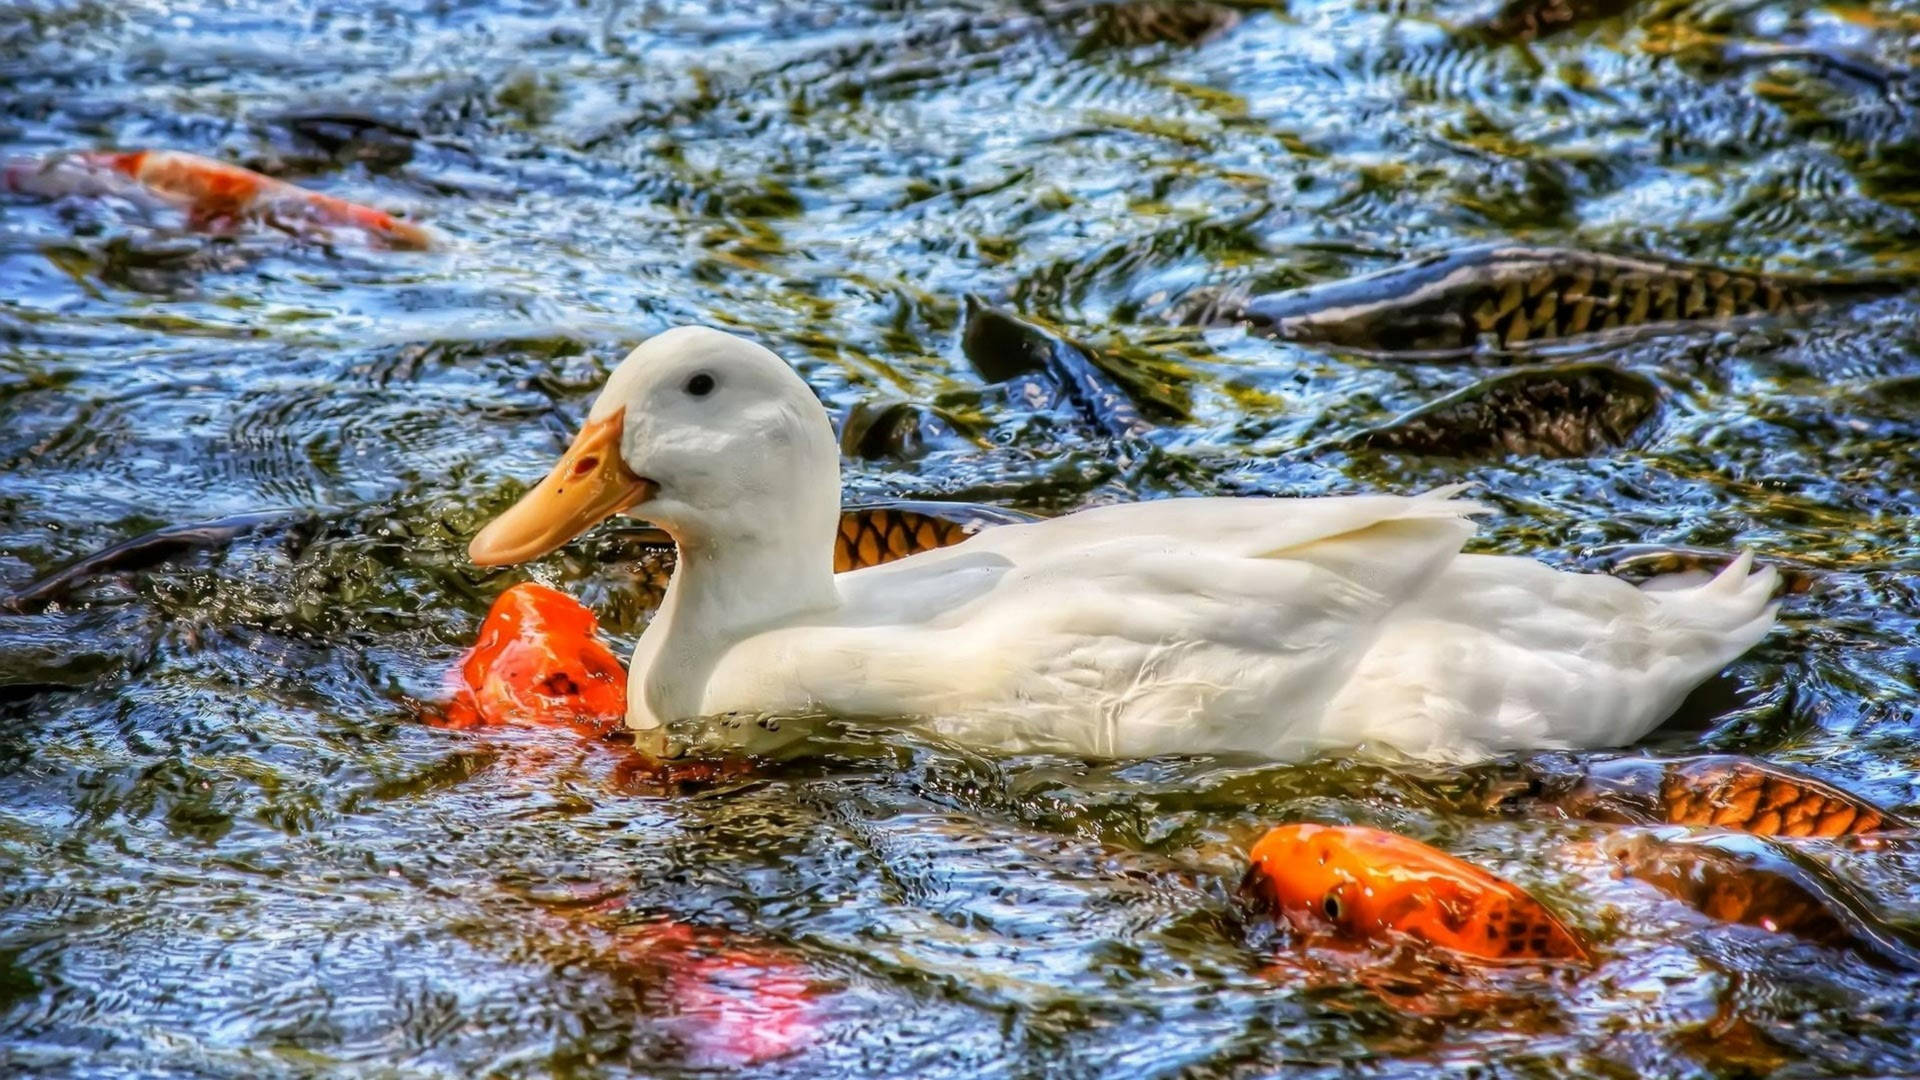 White Duck And Fishes Wallpaper